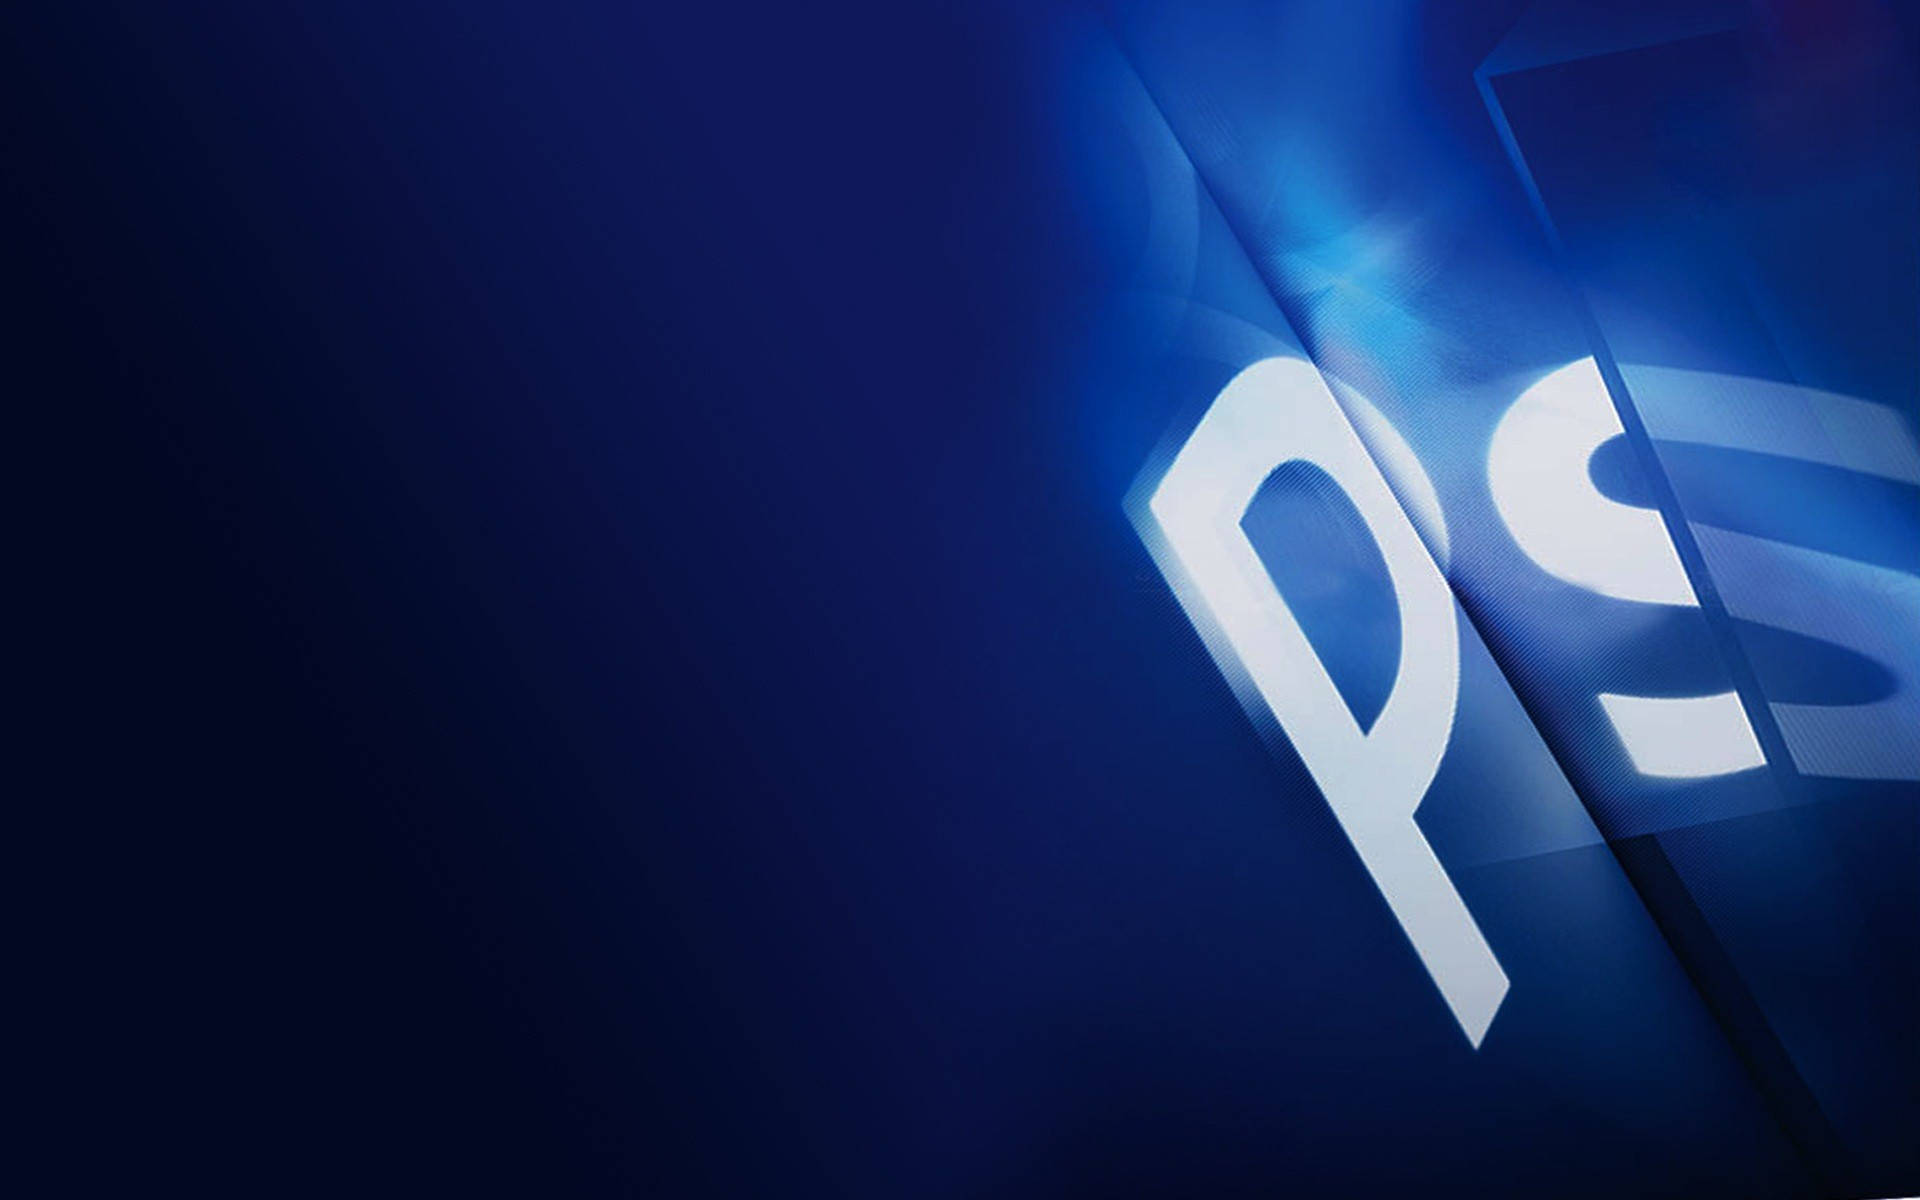 Lighted Adobe Photoshop Icon Wallpaper